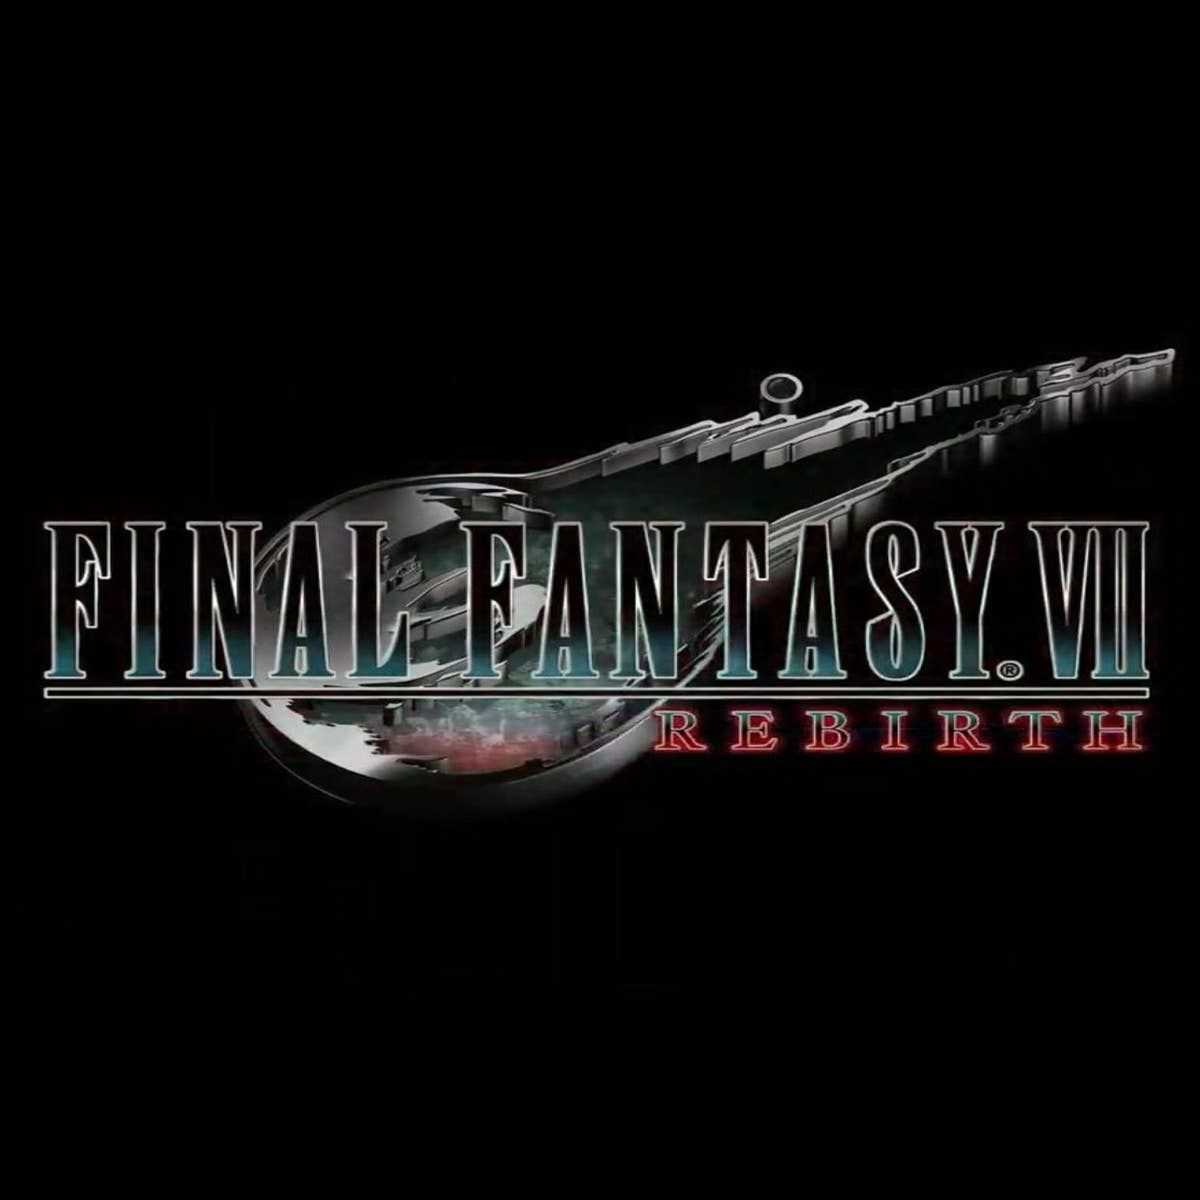 Please join me on the Final Fantasy VII Rebirth hype train